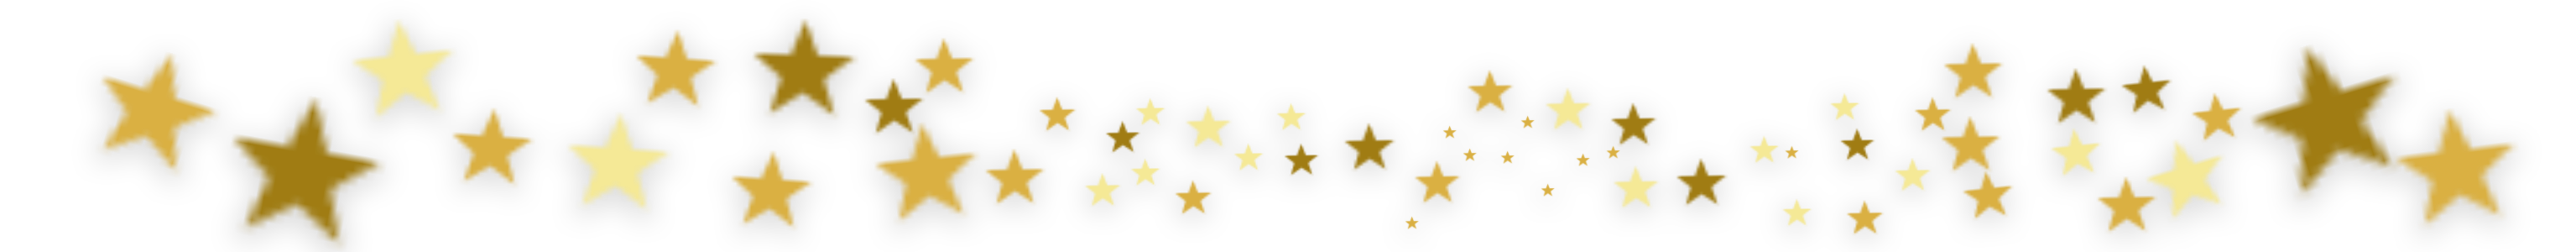 star banner png